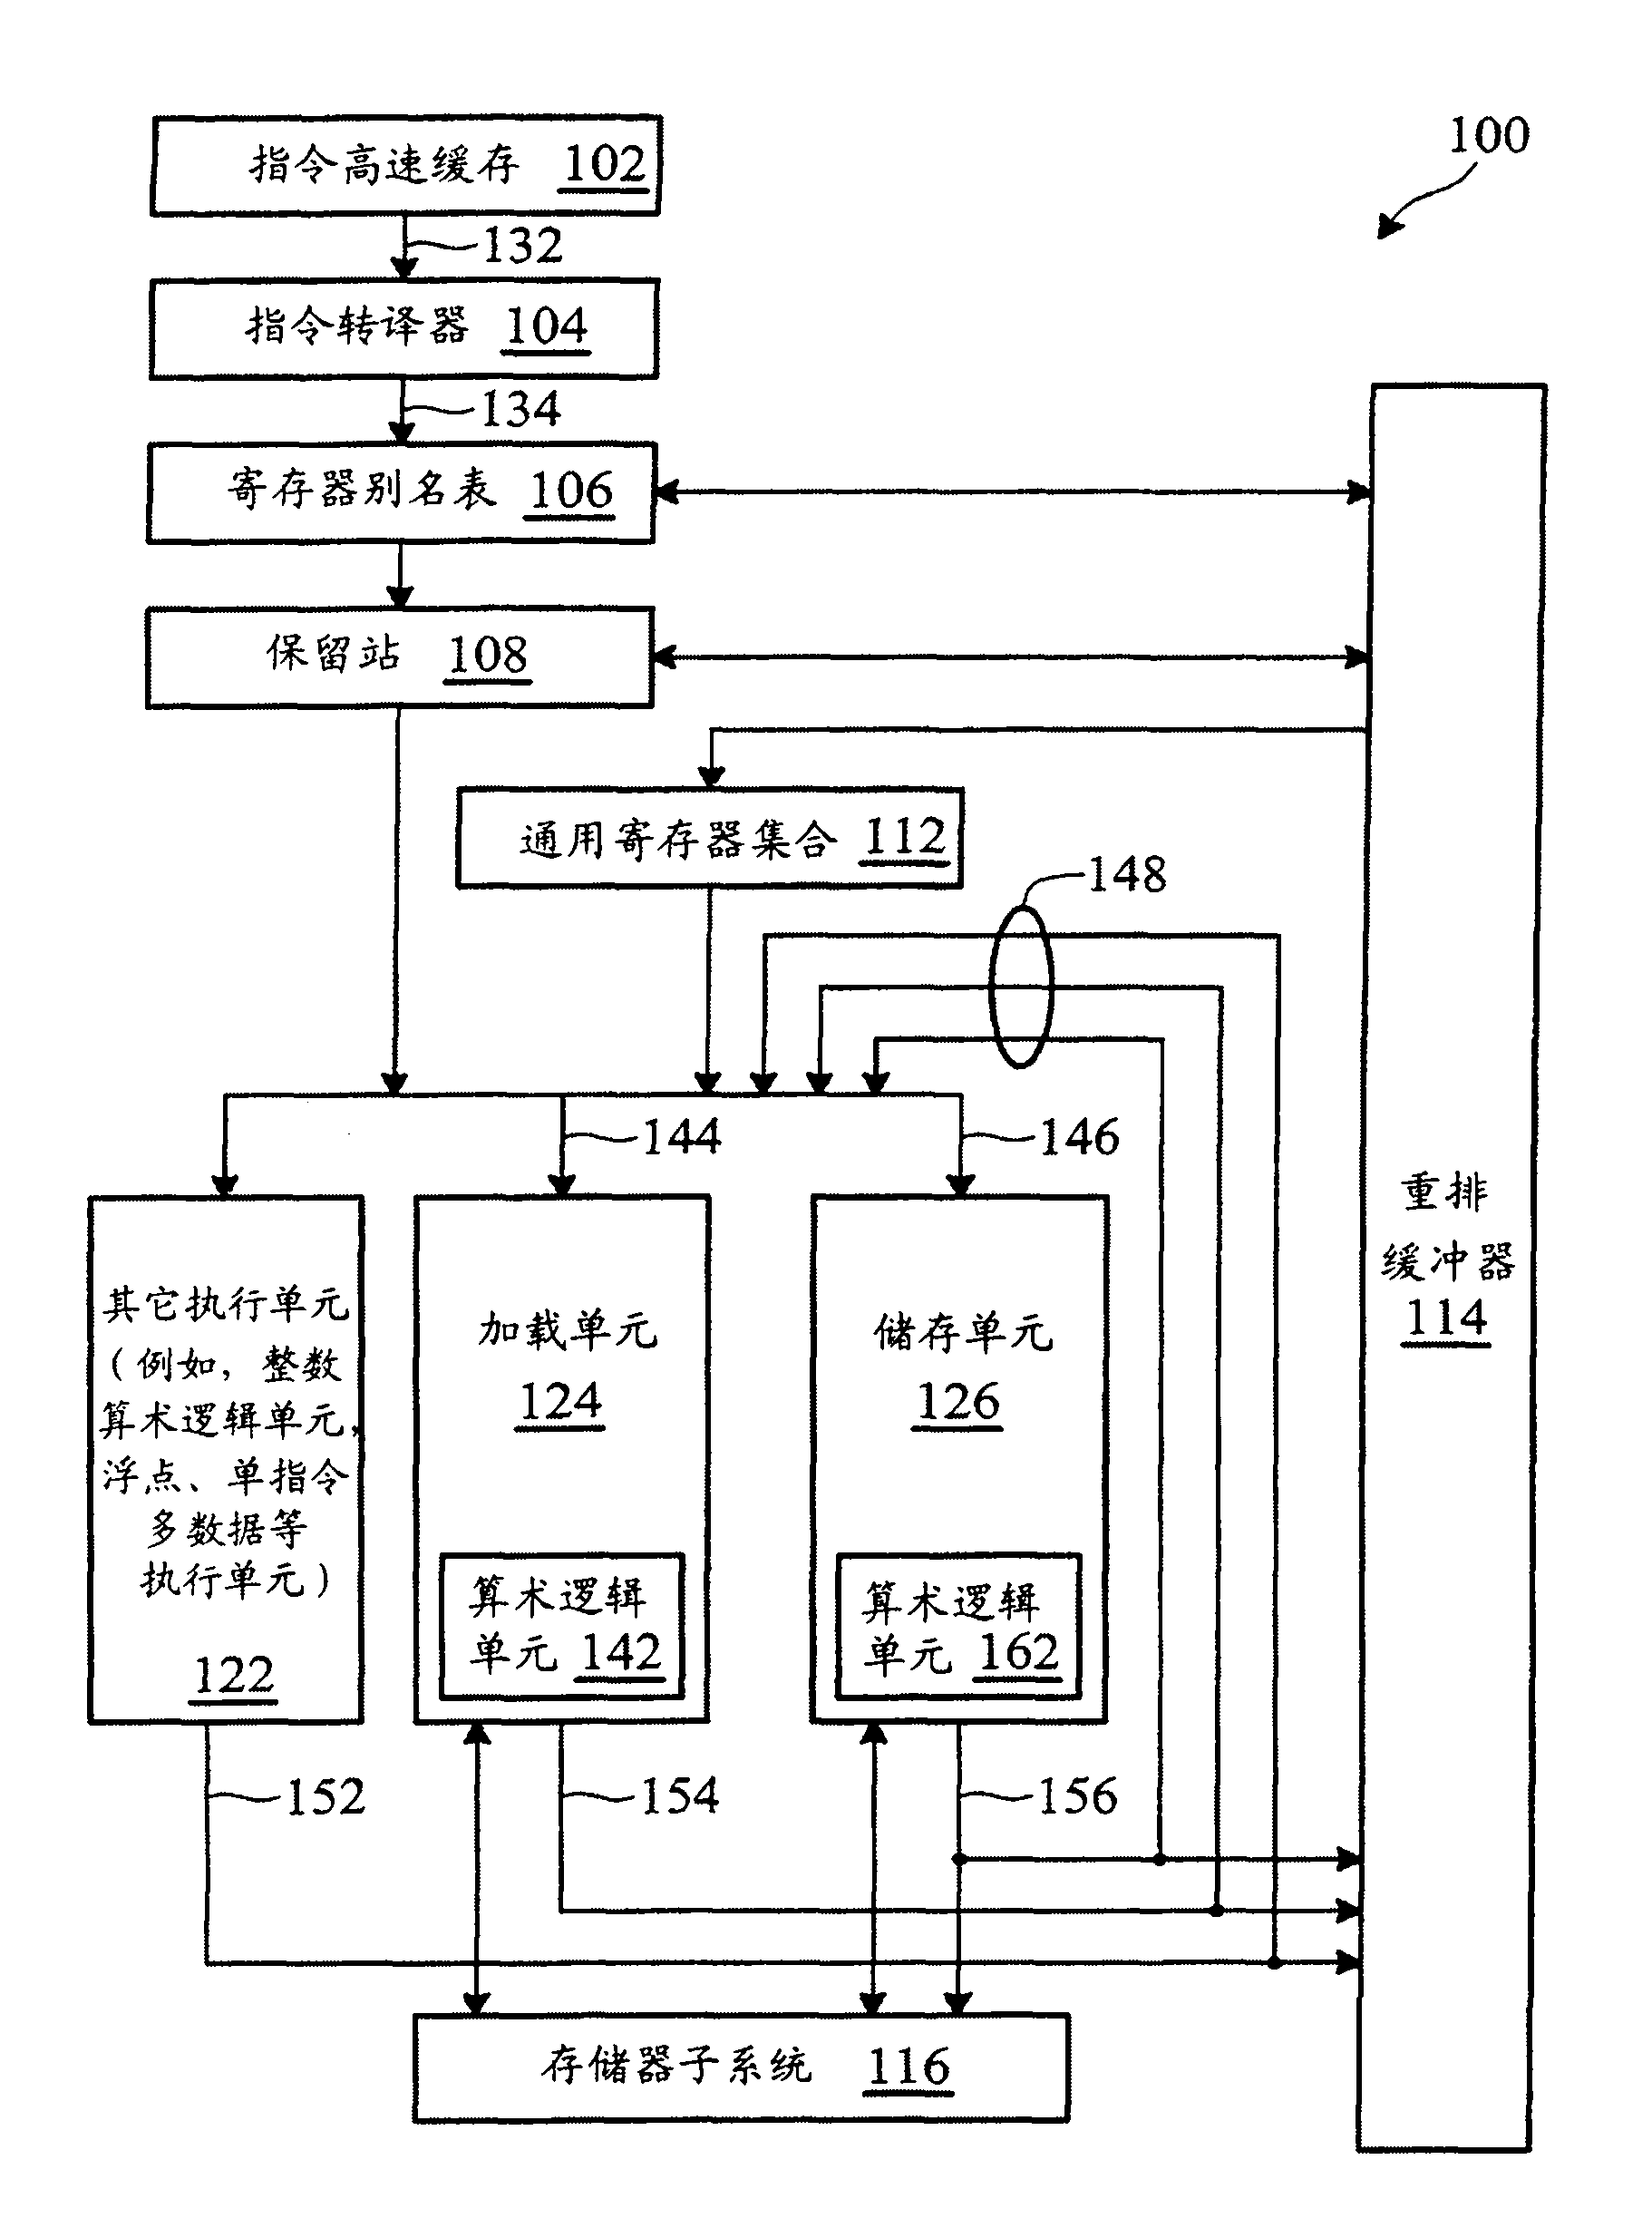 Instruction processing method and its applicable superscalar pipeline microprocessor